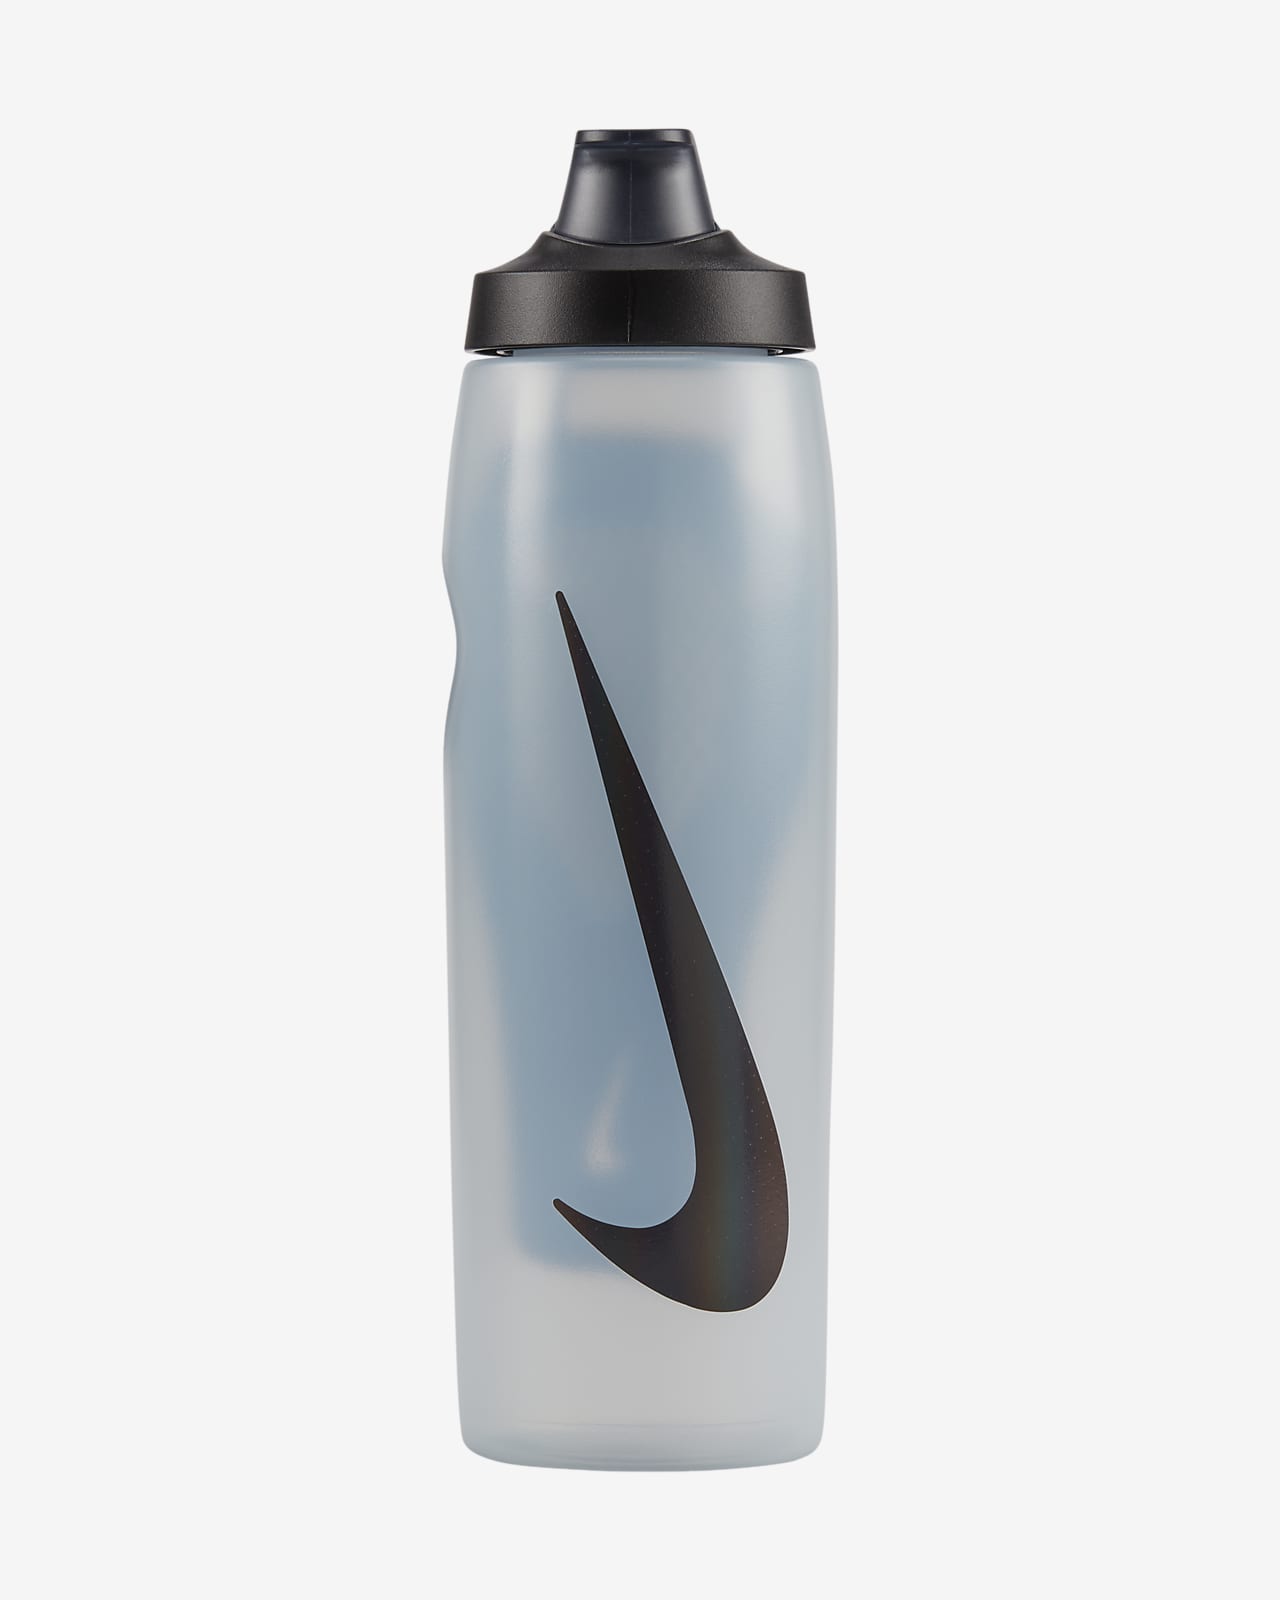 https://static.nike.com/a/images/t_PDP_1280_v1/f_auto,q_auto:eco/eafaef69-a02d-4a19-95ef-bd0fee15c961/refuel-squeezable-bottle-32-oz-1zD42P.png